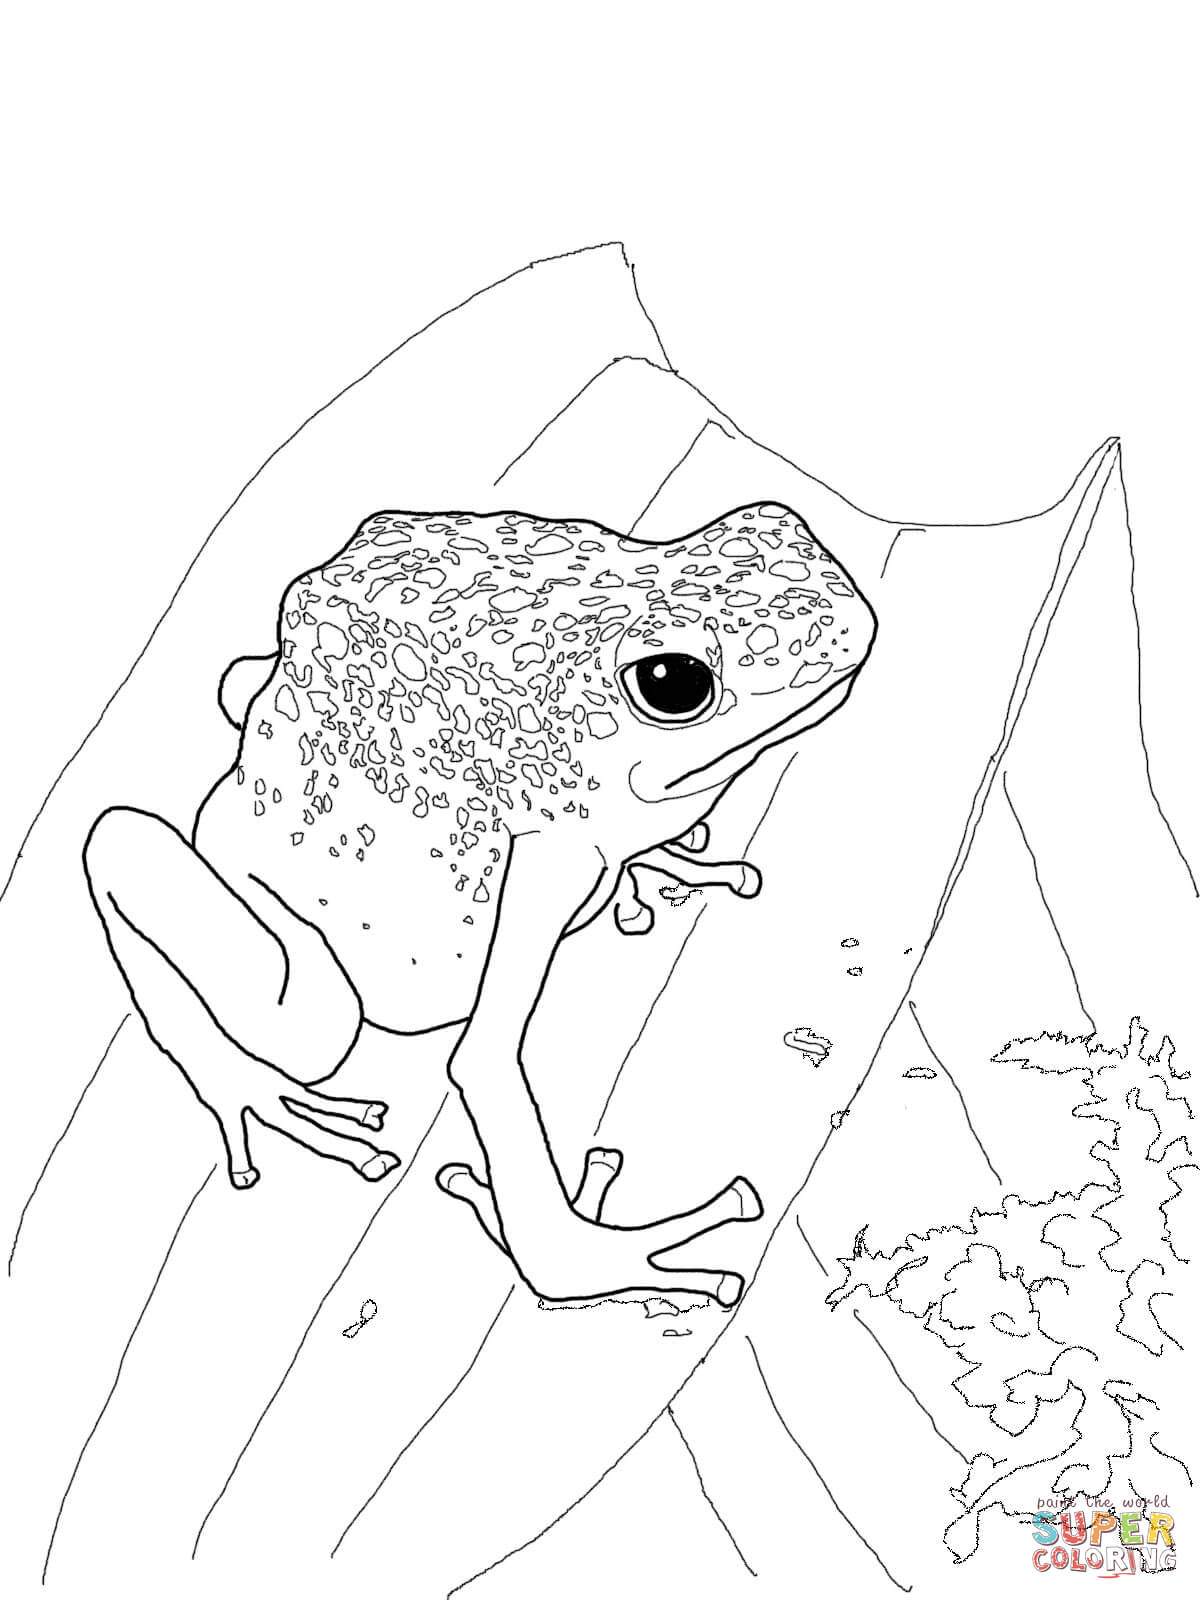 Blue Poison Dart Frog coloring page | Free Printable Coloring Pages